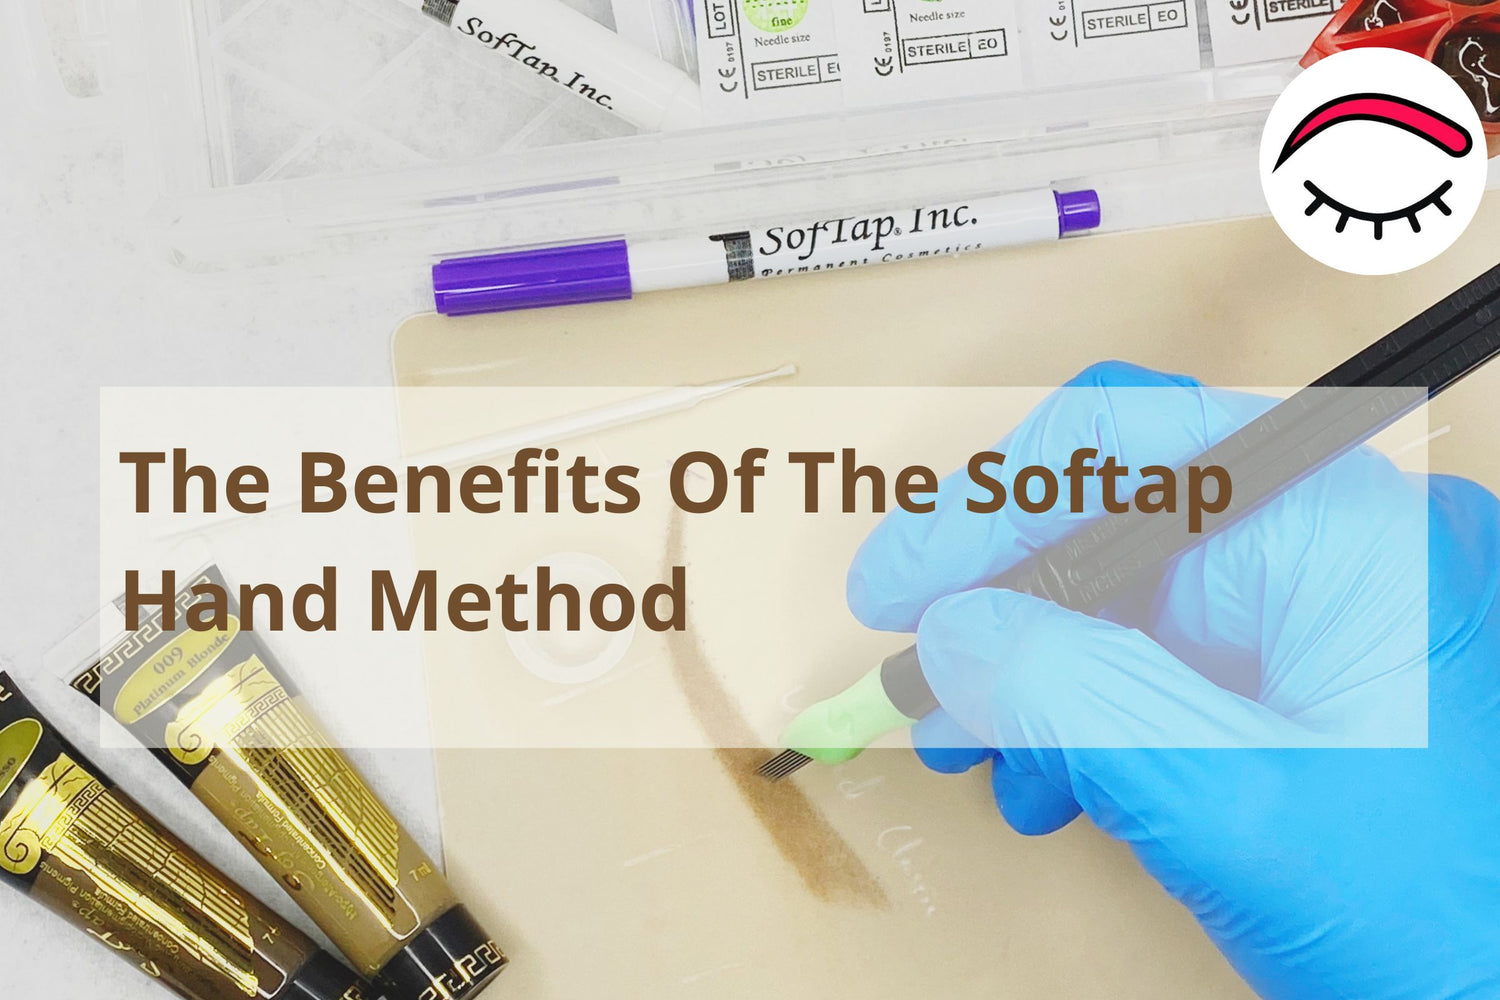 The Benefits of the Softap Hand Method